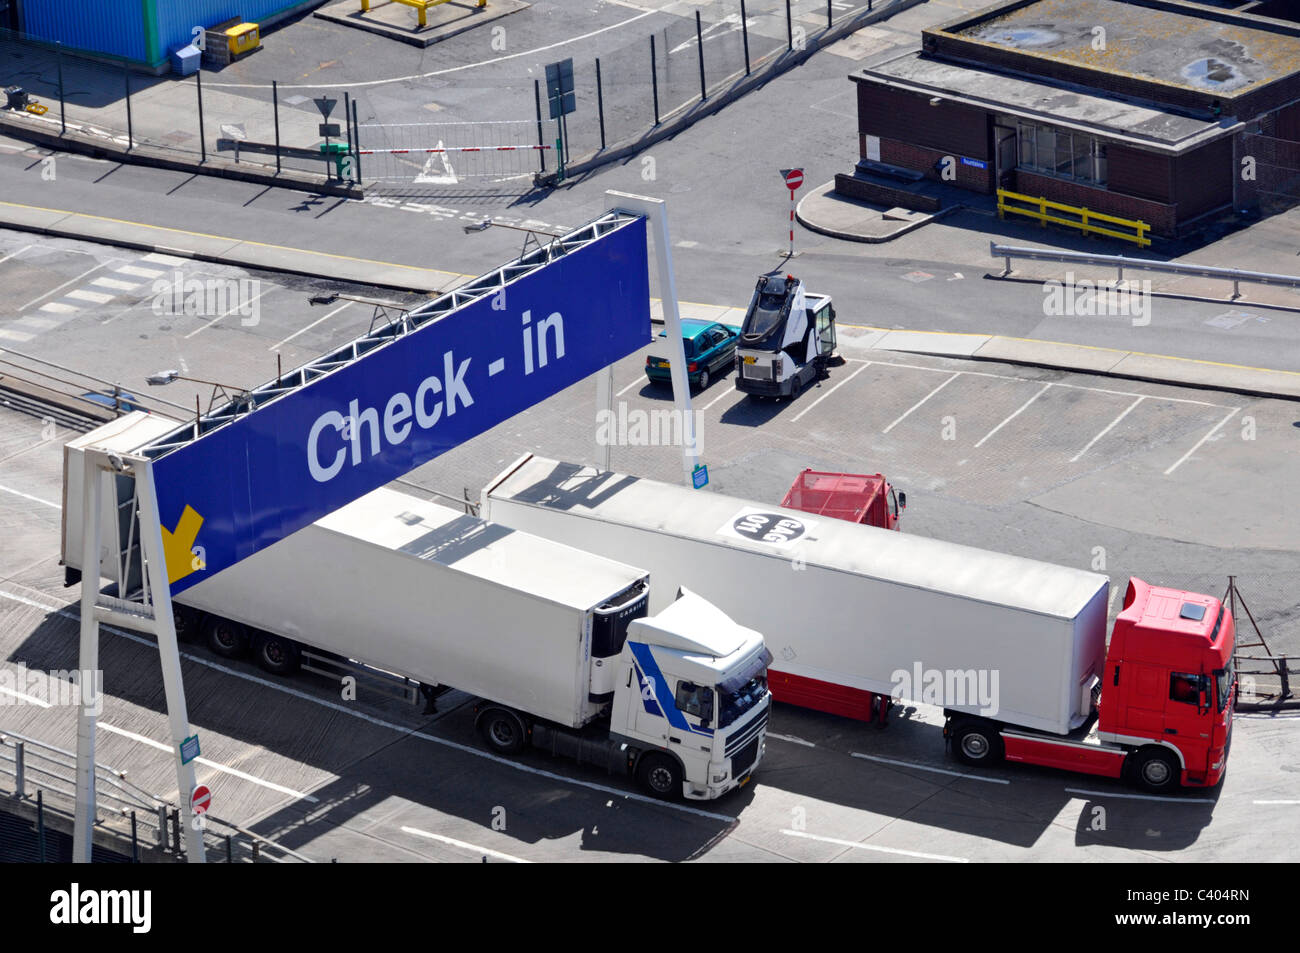 Aerial birds eye view looking down on two hgv lorry truck trailer vehicles leaving Dover ferry Port below check in lane gantry sign Kent England UK Stock Photo